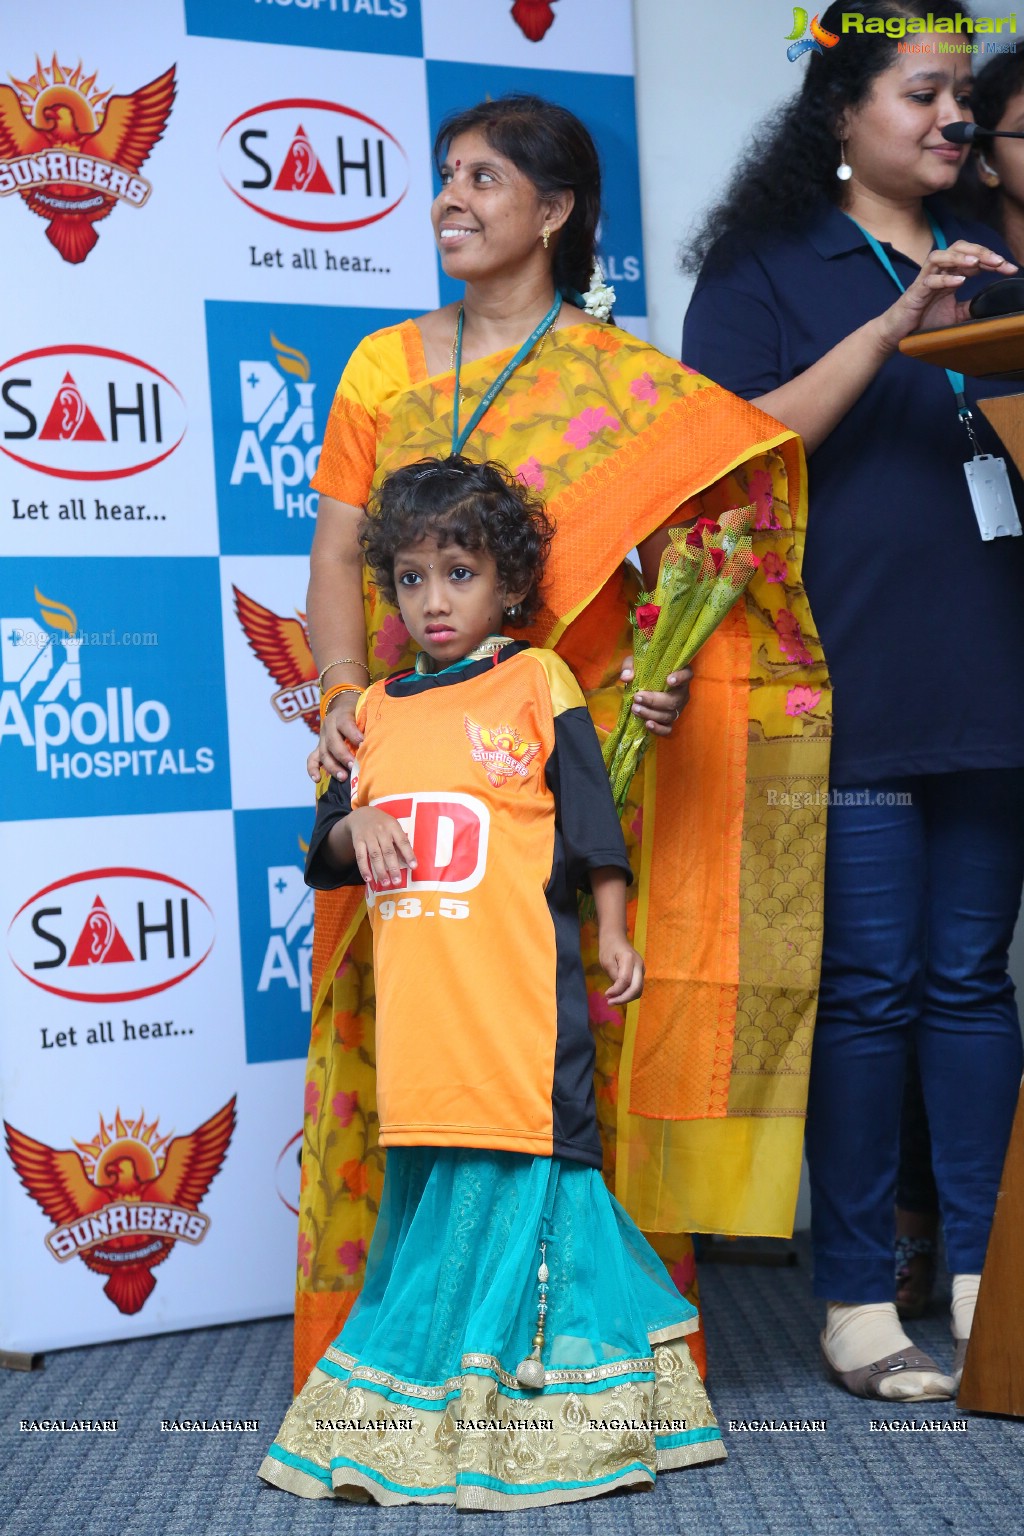 Apollo and Sahi 3 Years Celebrations of Hearing Impaired Girl Child Project